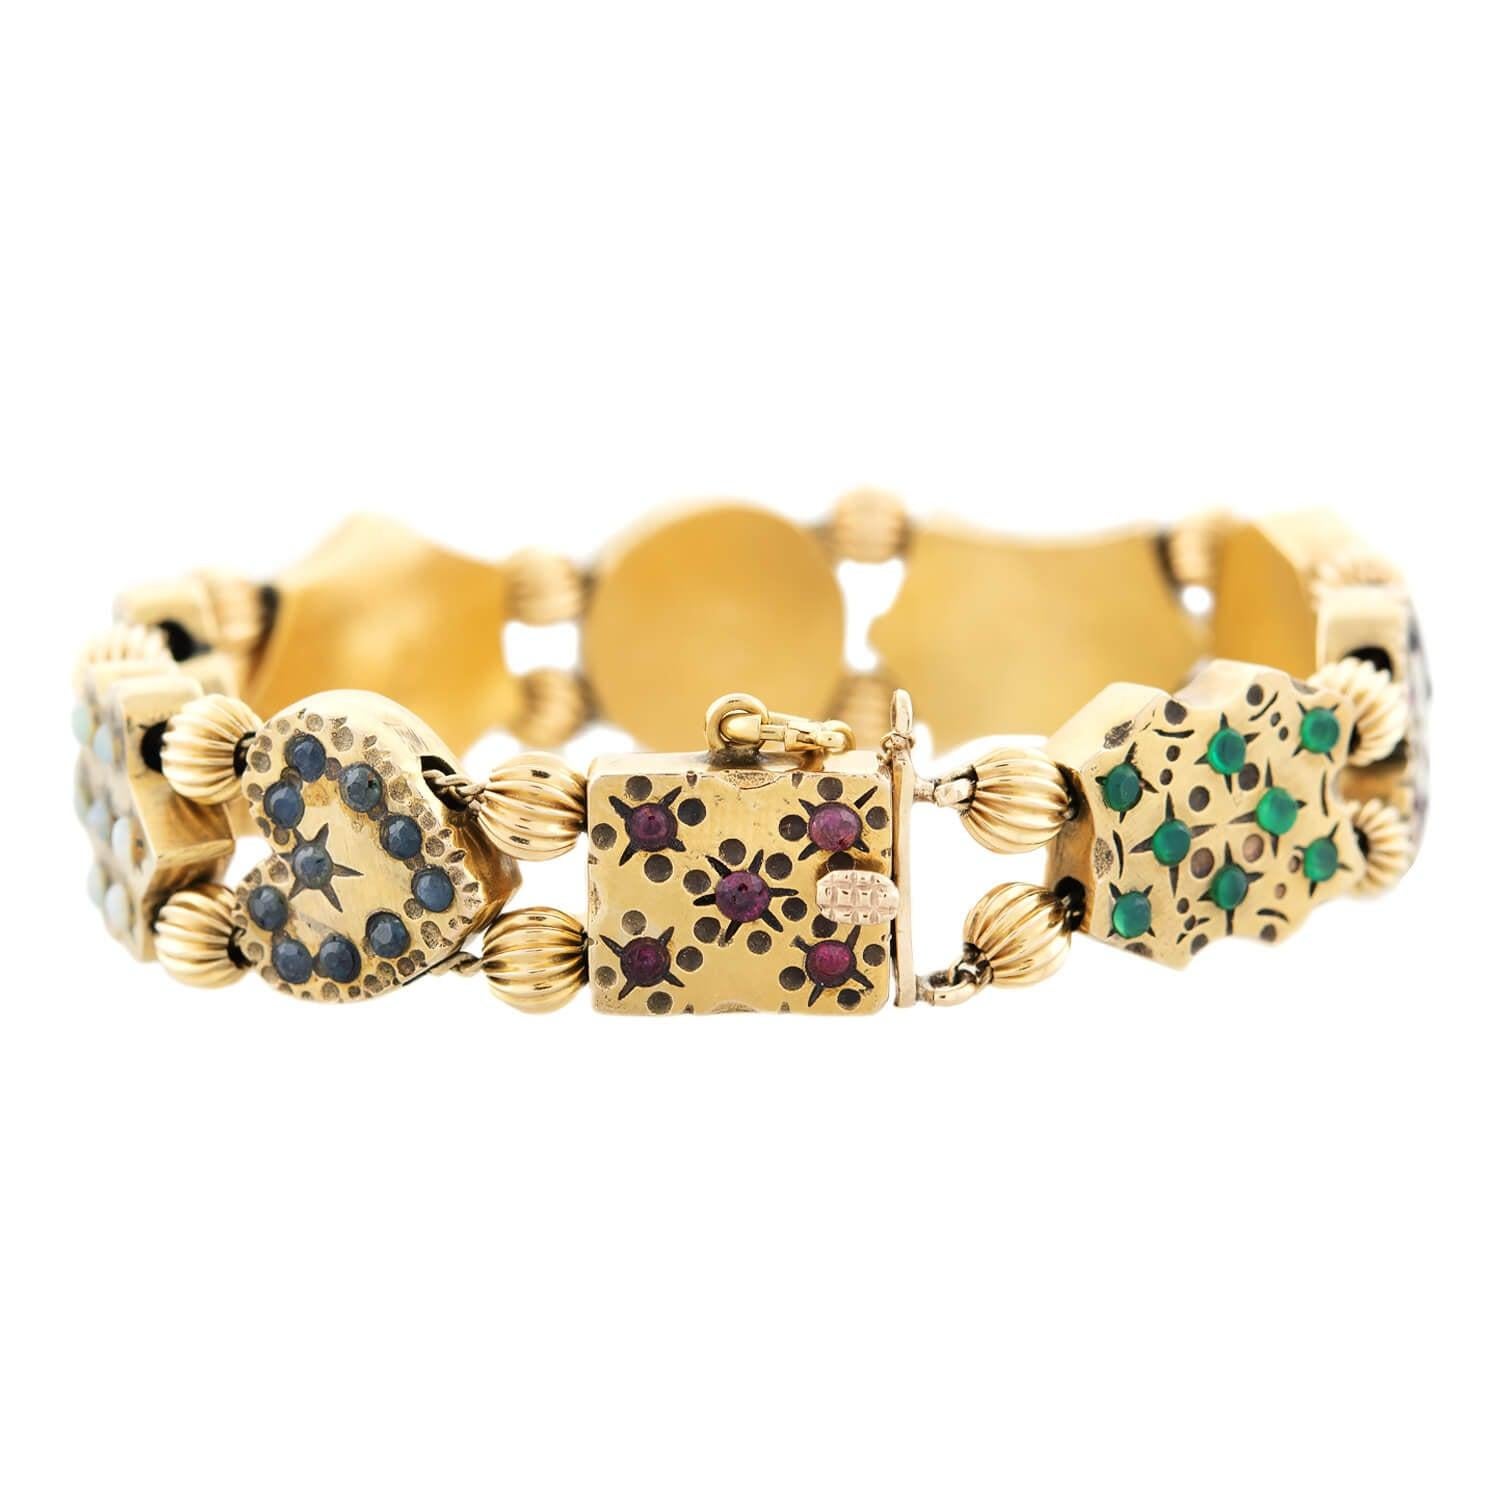 An incredible and unique multi-gemstone slide bracelet from the Victorian (ca1880) era! This stunning yellow gold compilation piece features ten highly decorative slide pendants gracing a beaded double-stranded chain. The gorgeous slides are formed